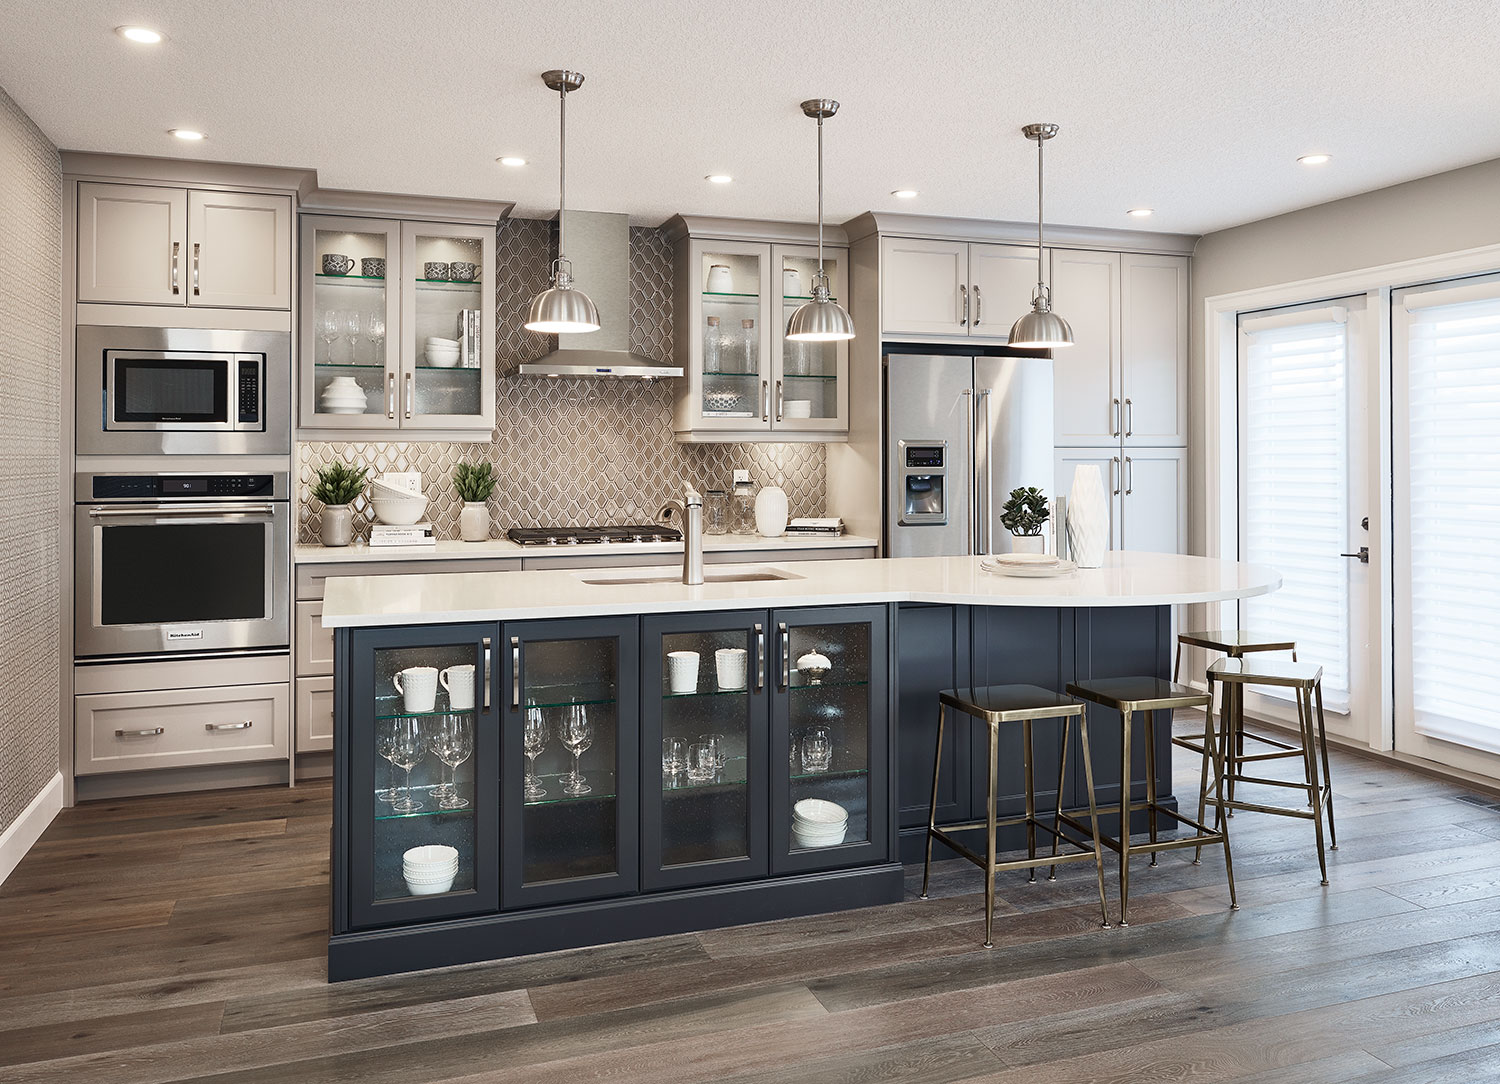 Mattamy Homes designs are characterized by their open concept, which brings the dining room, living room and kitchen together. Photo courtesy of Mattamy Homes